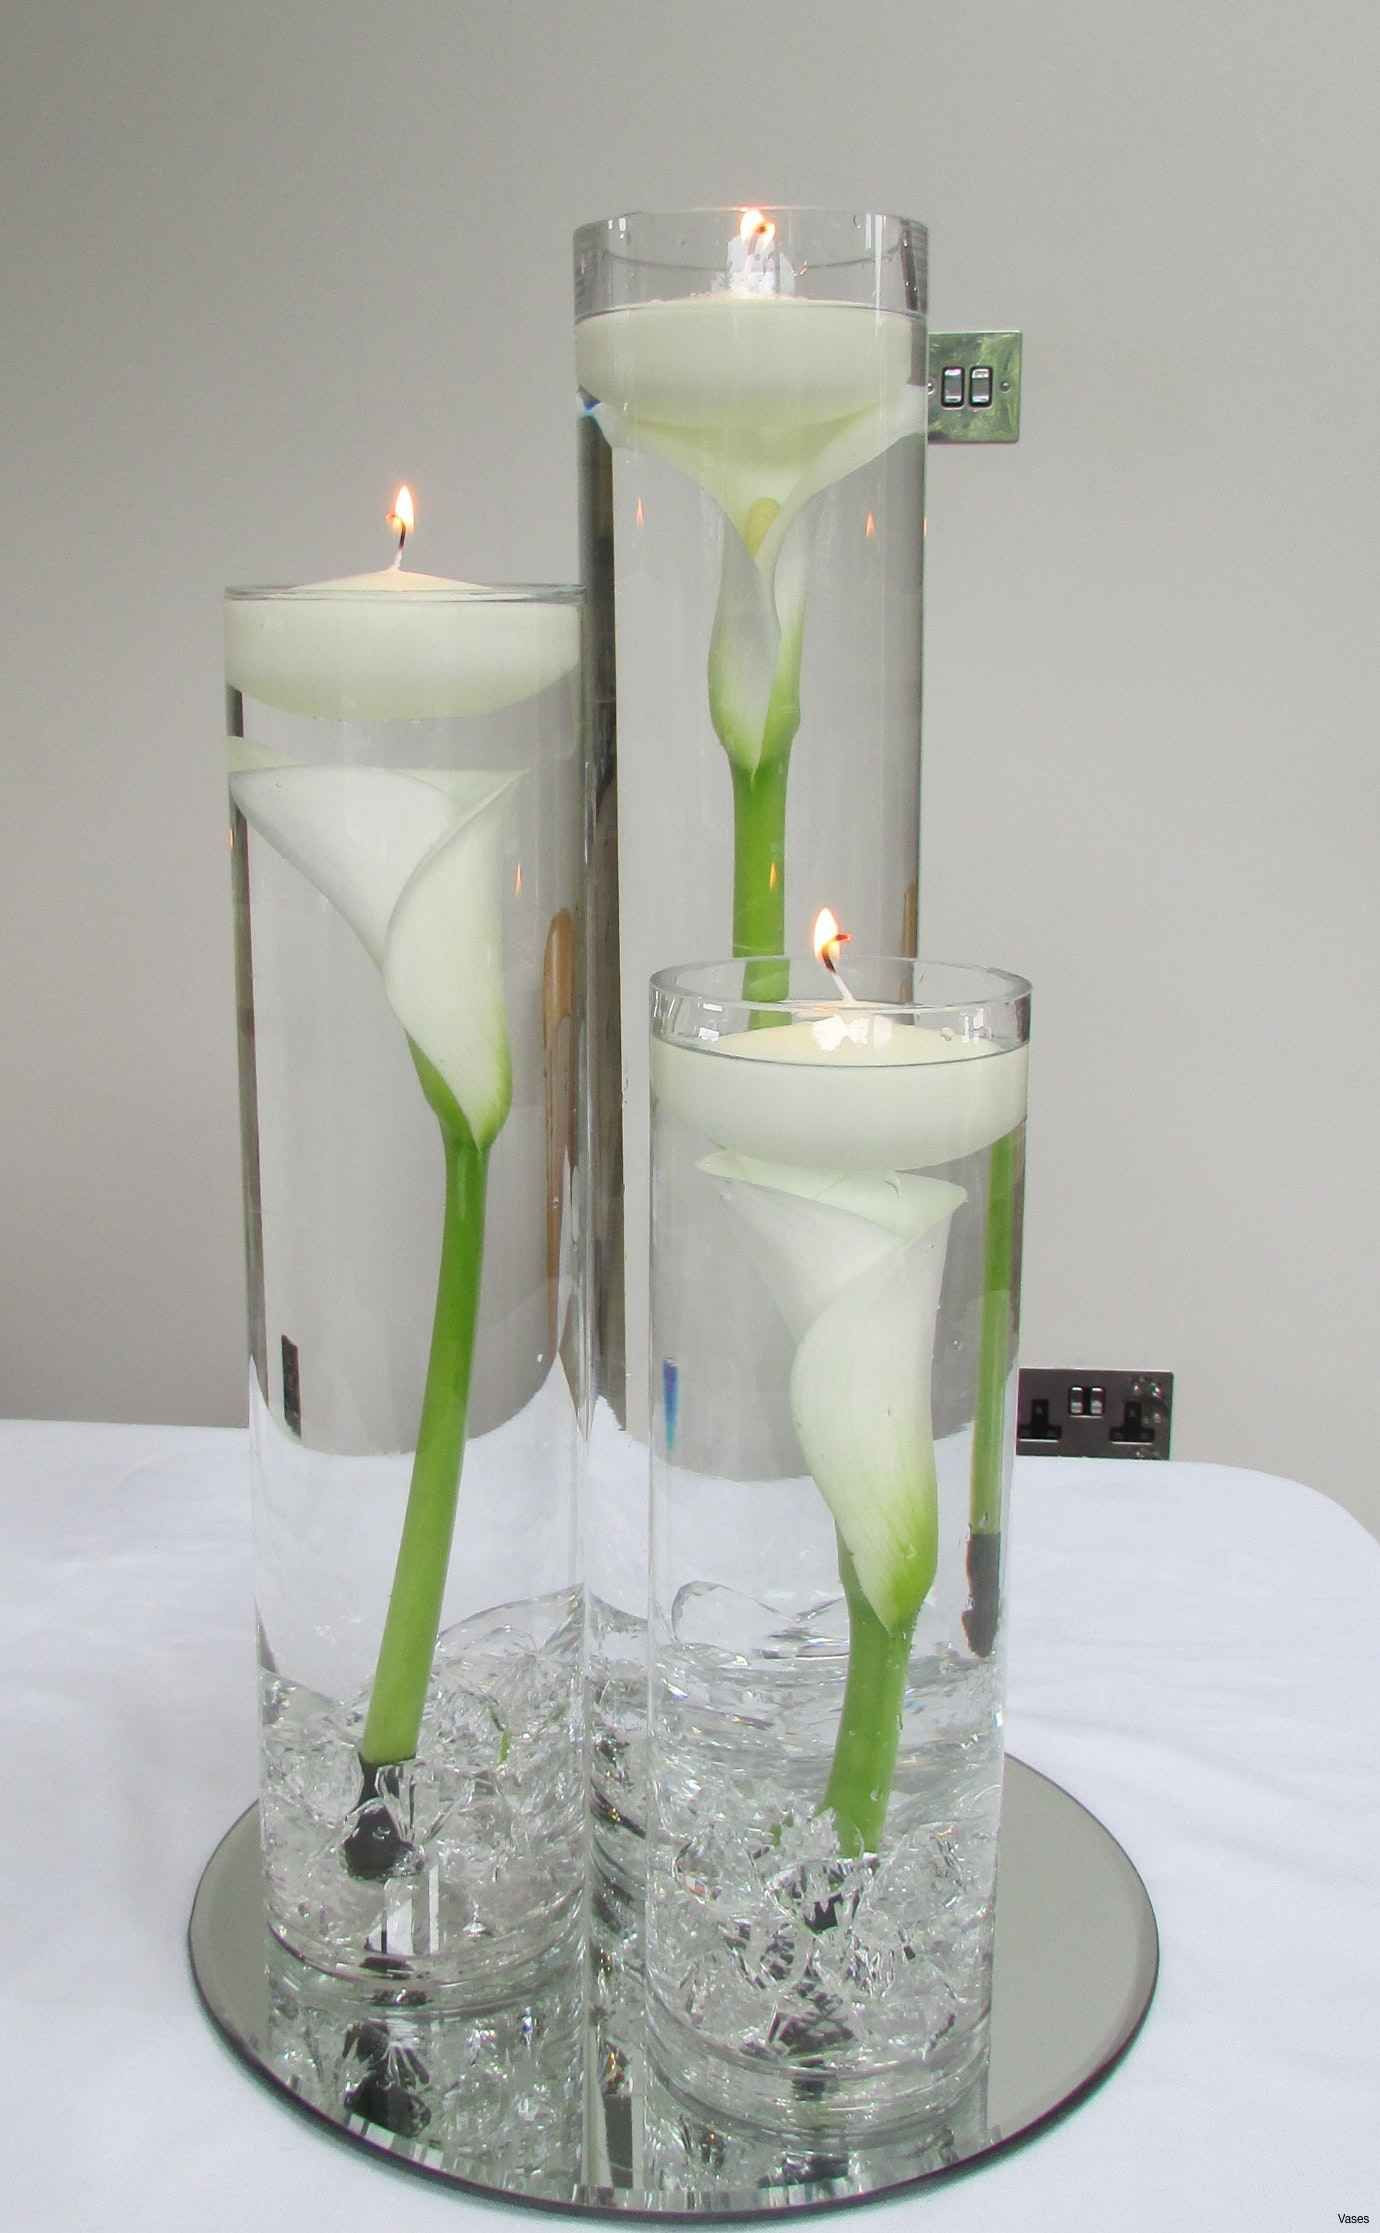 11 Ideal Cheap Glass Vases for Wedding 2022 free download cheap glass vases for wedding of gold mercury glass vases beautiful vases floating candle vase set pertaining to gold mercury glass vases beautiful vases floating candle vase set glass holde